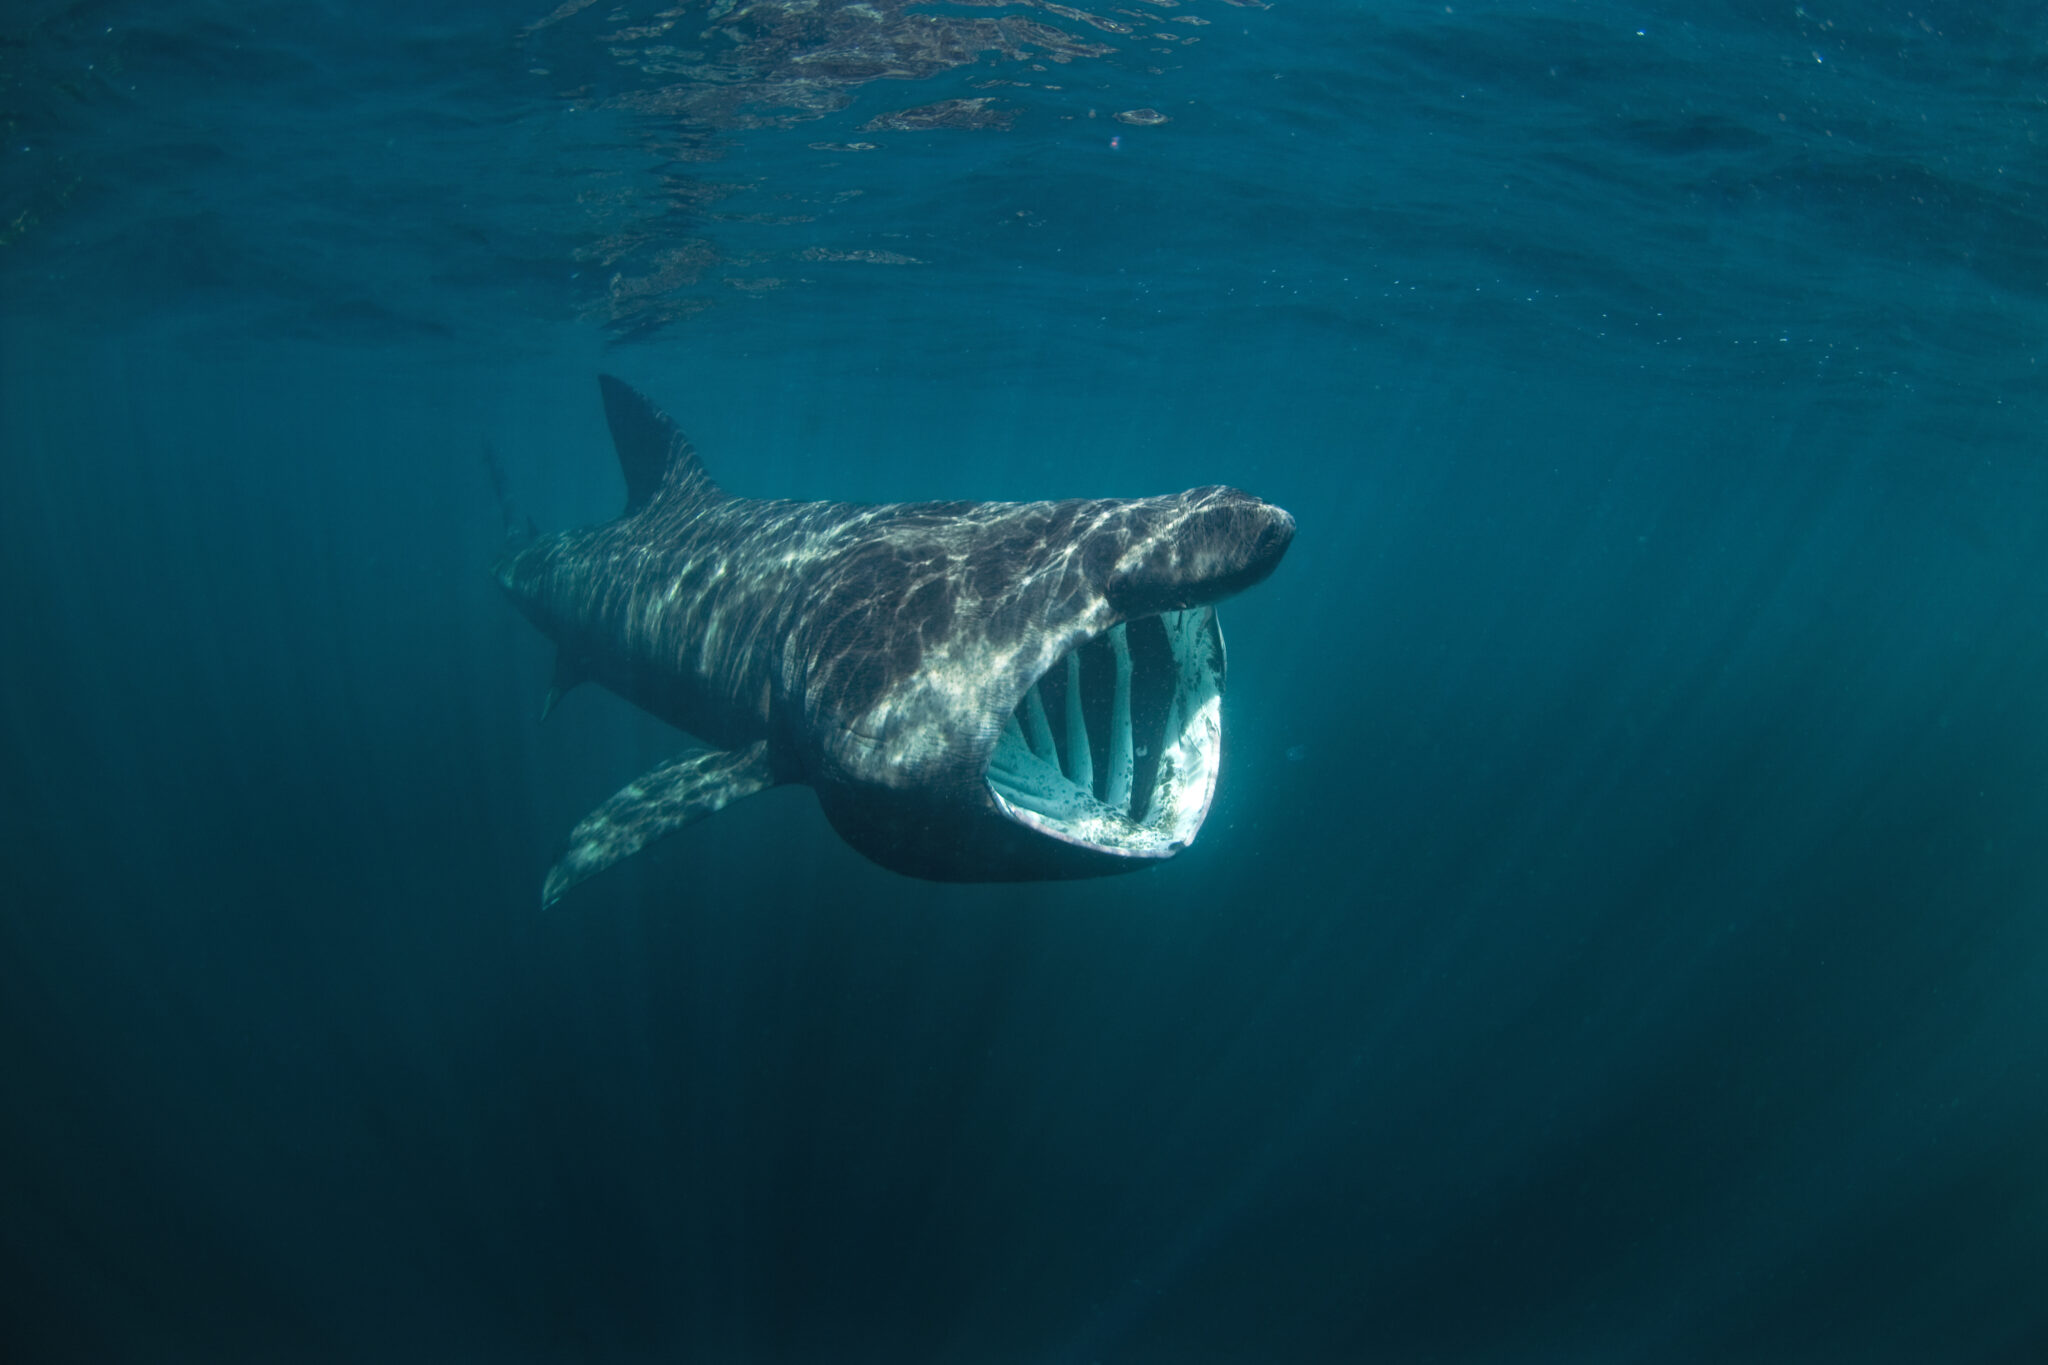 A giant basking shark swimming with its mouth open in Scotland, which is one of the best places to see this species in the UK